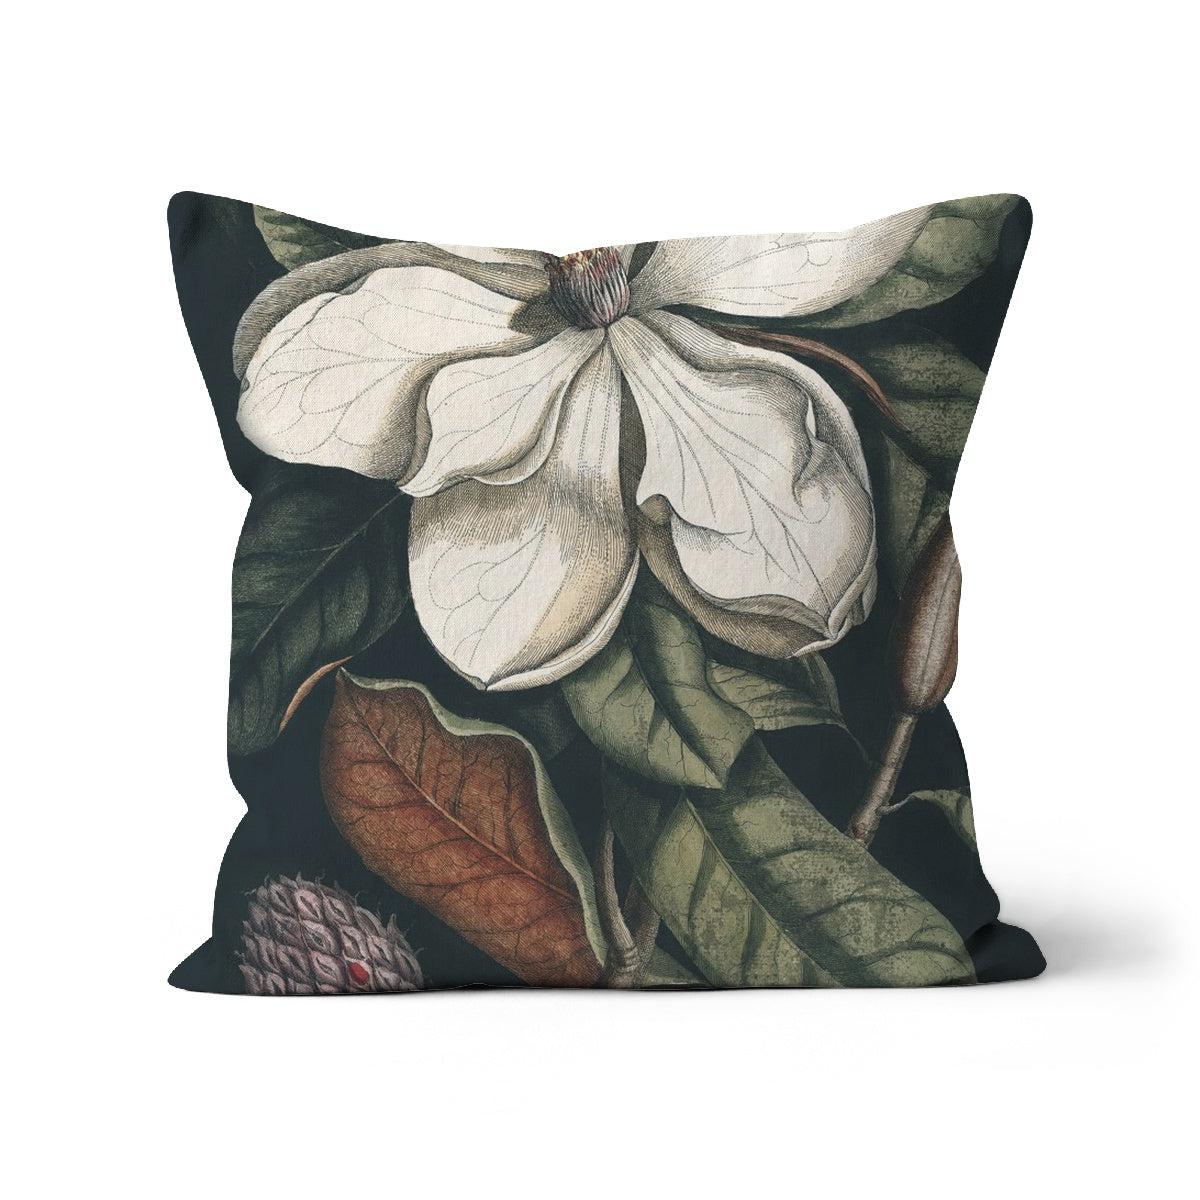 Nature Romance Cushion-Comfort-CUSHIONS, CUSHIONS / PILLOWS-Forest Homes-Nature inspired decor-Nature decor